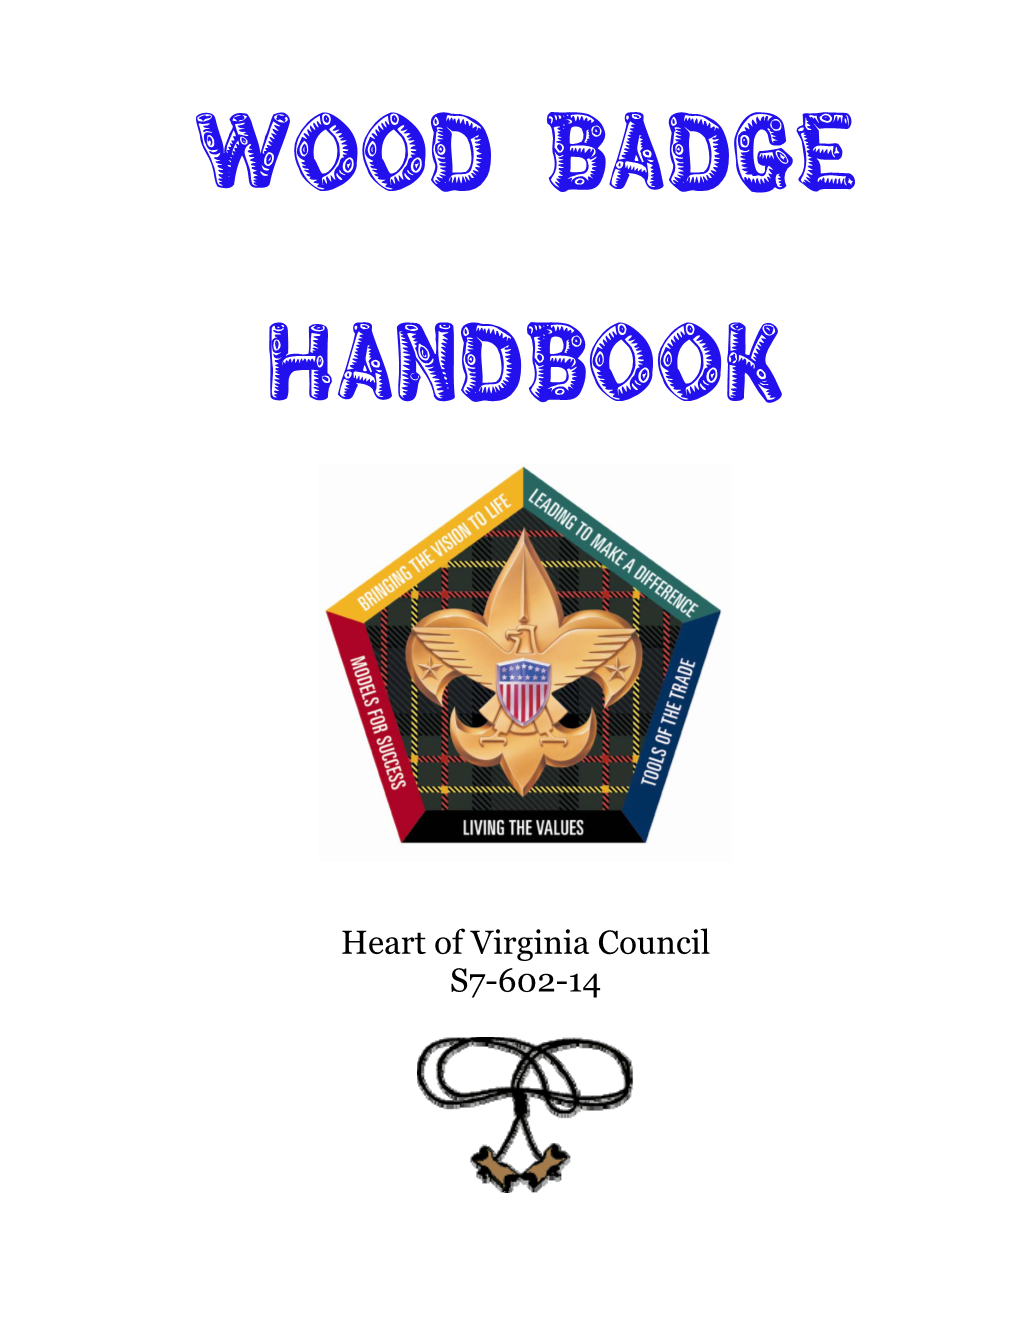 Wood Badge Handbook Useful Throughout the Course and a Valuable Reference for You to Use for Years to Come